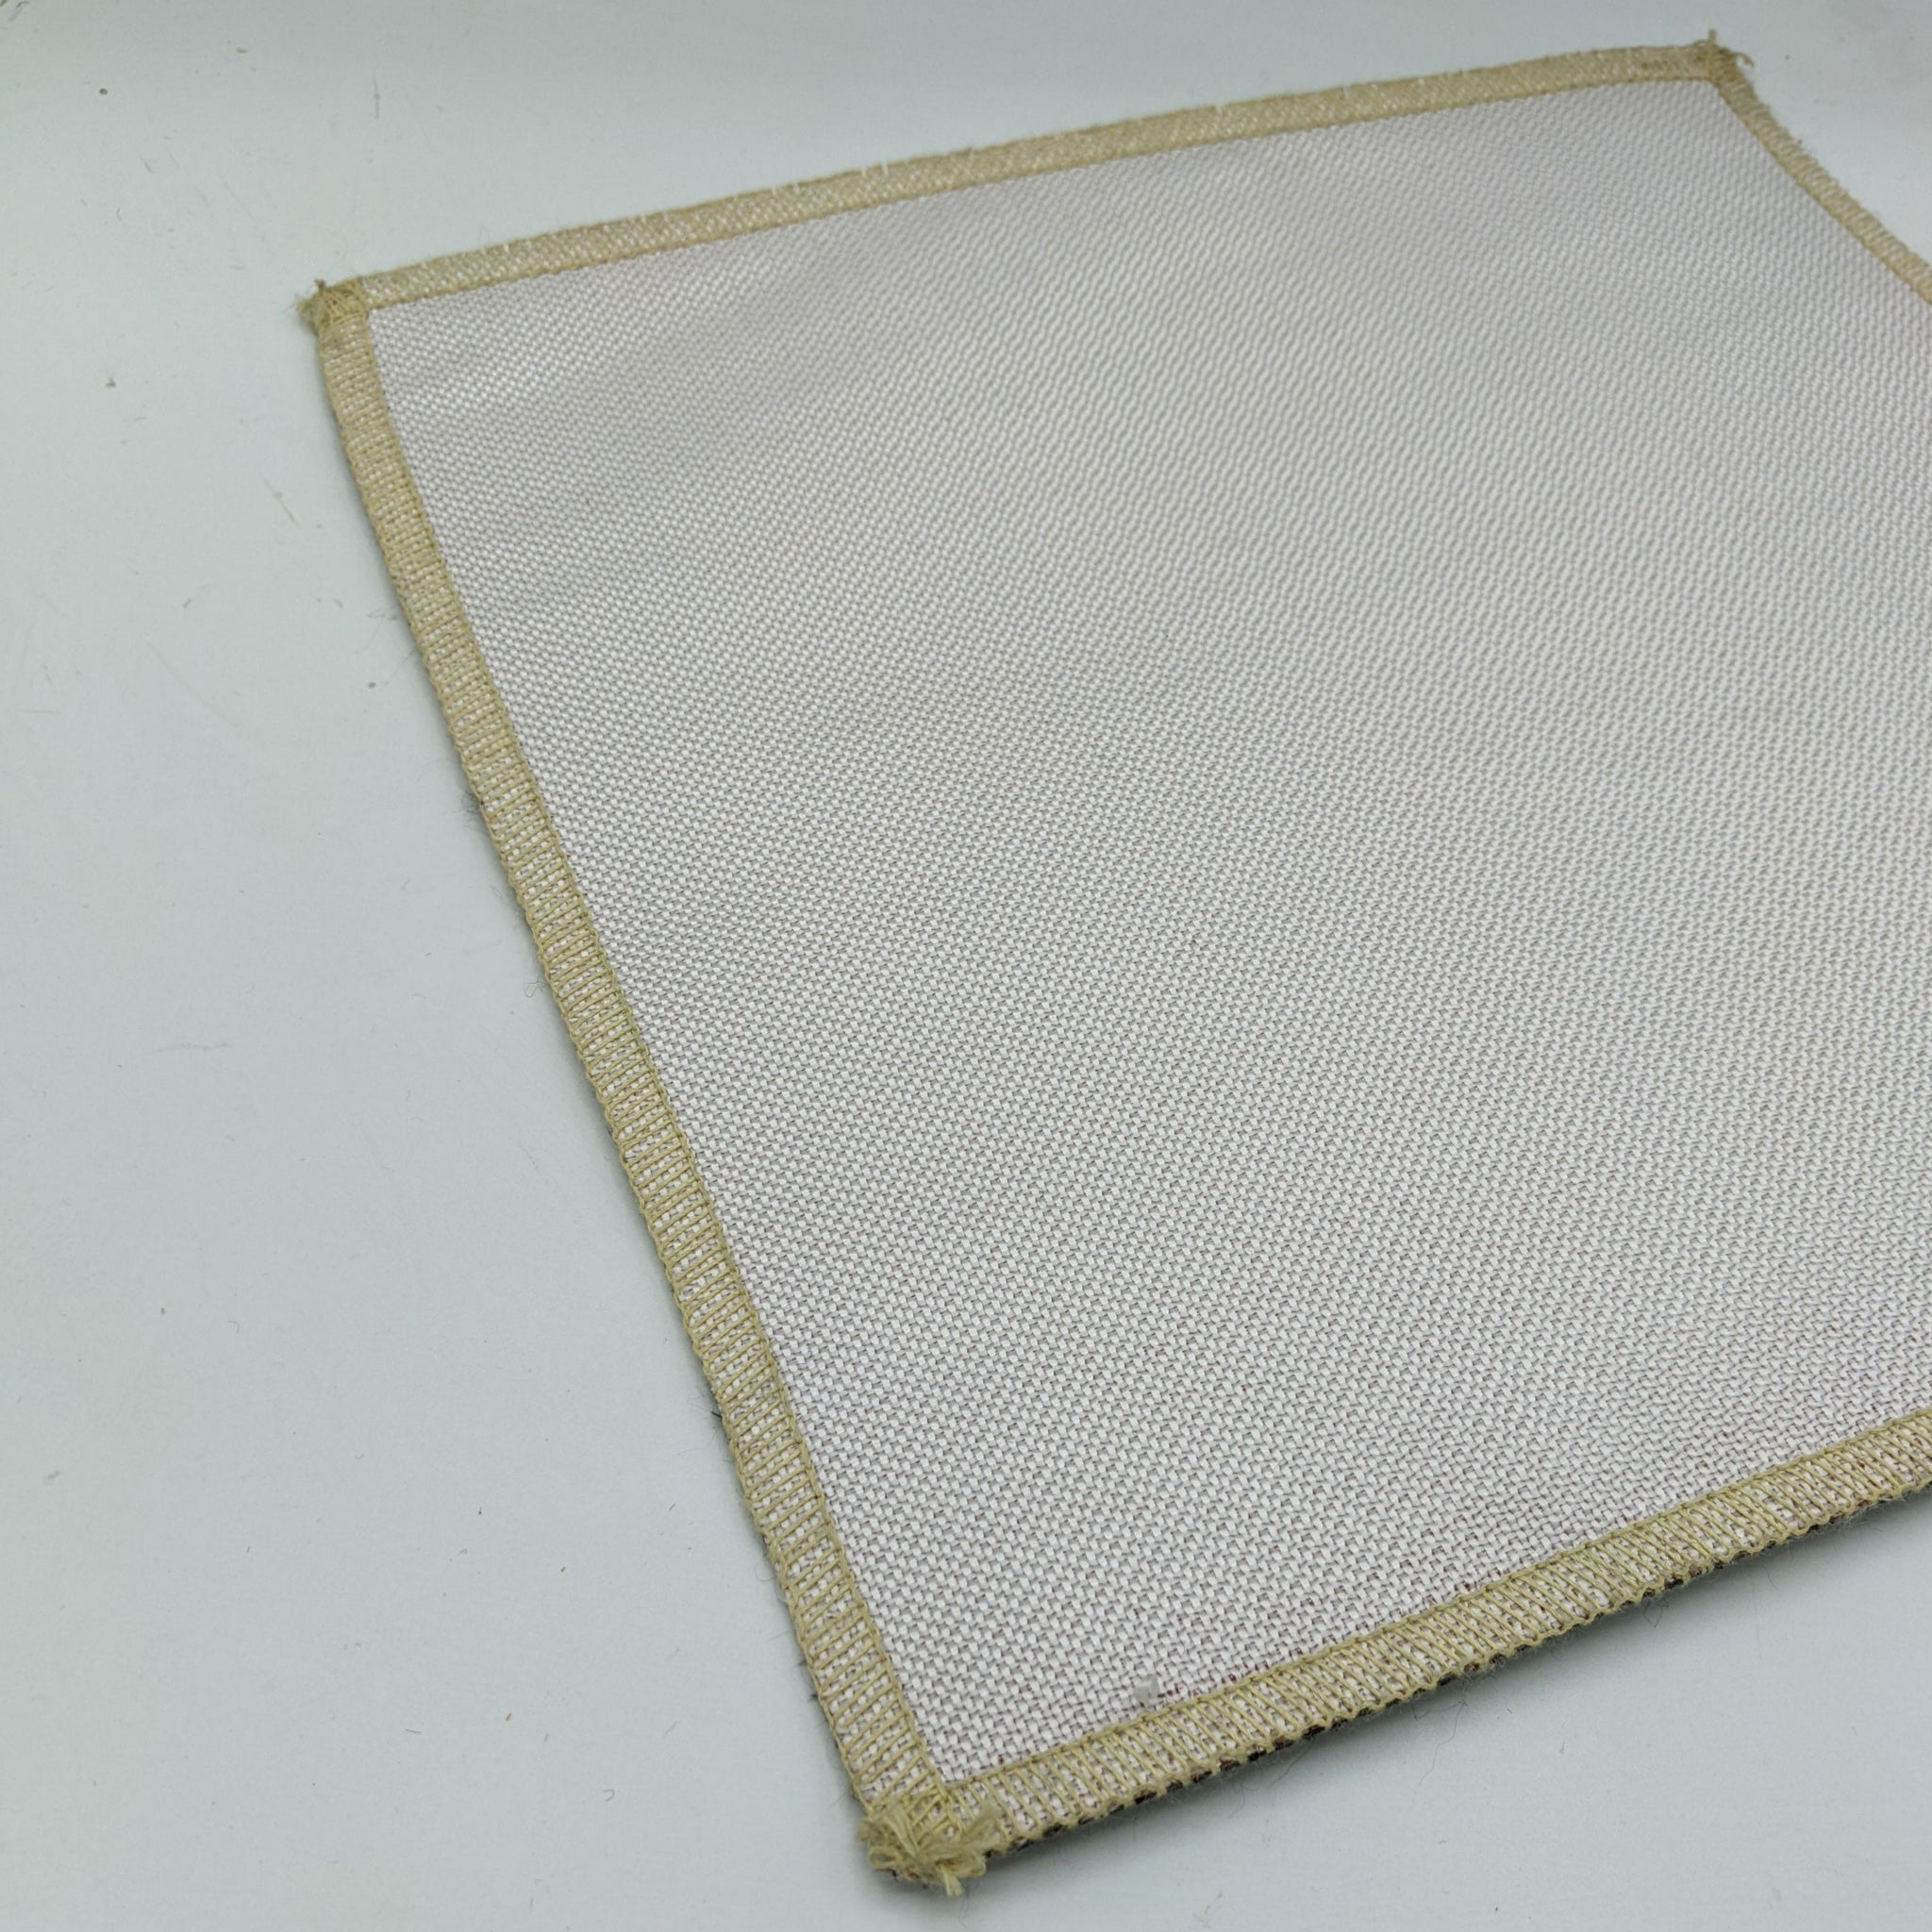 600ºC Gamasco 2 Layer Heat Resistant Plumbers Mat Silica/Graphited Cloth 250mm x 250mm